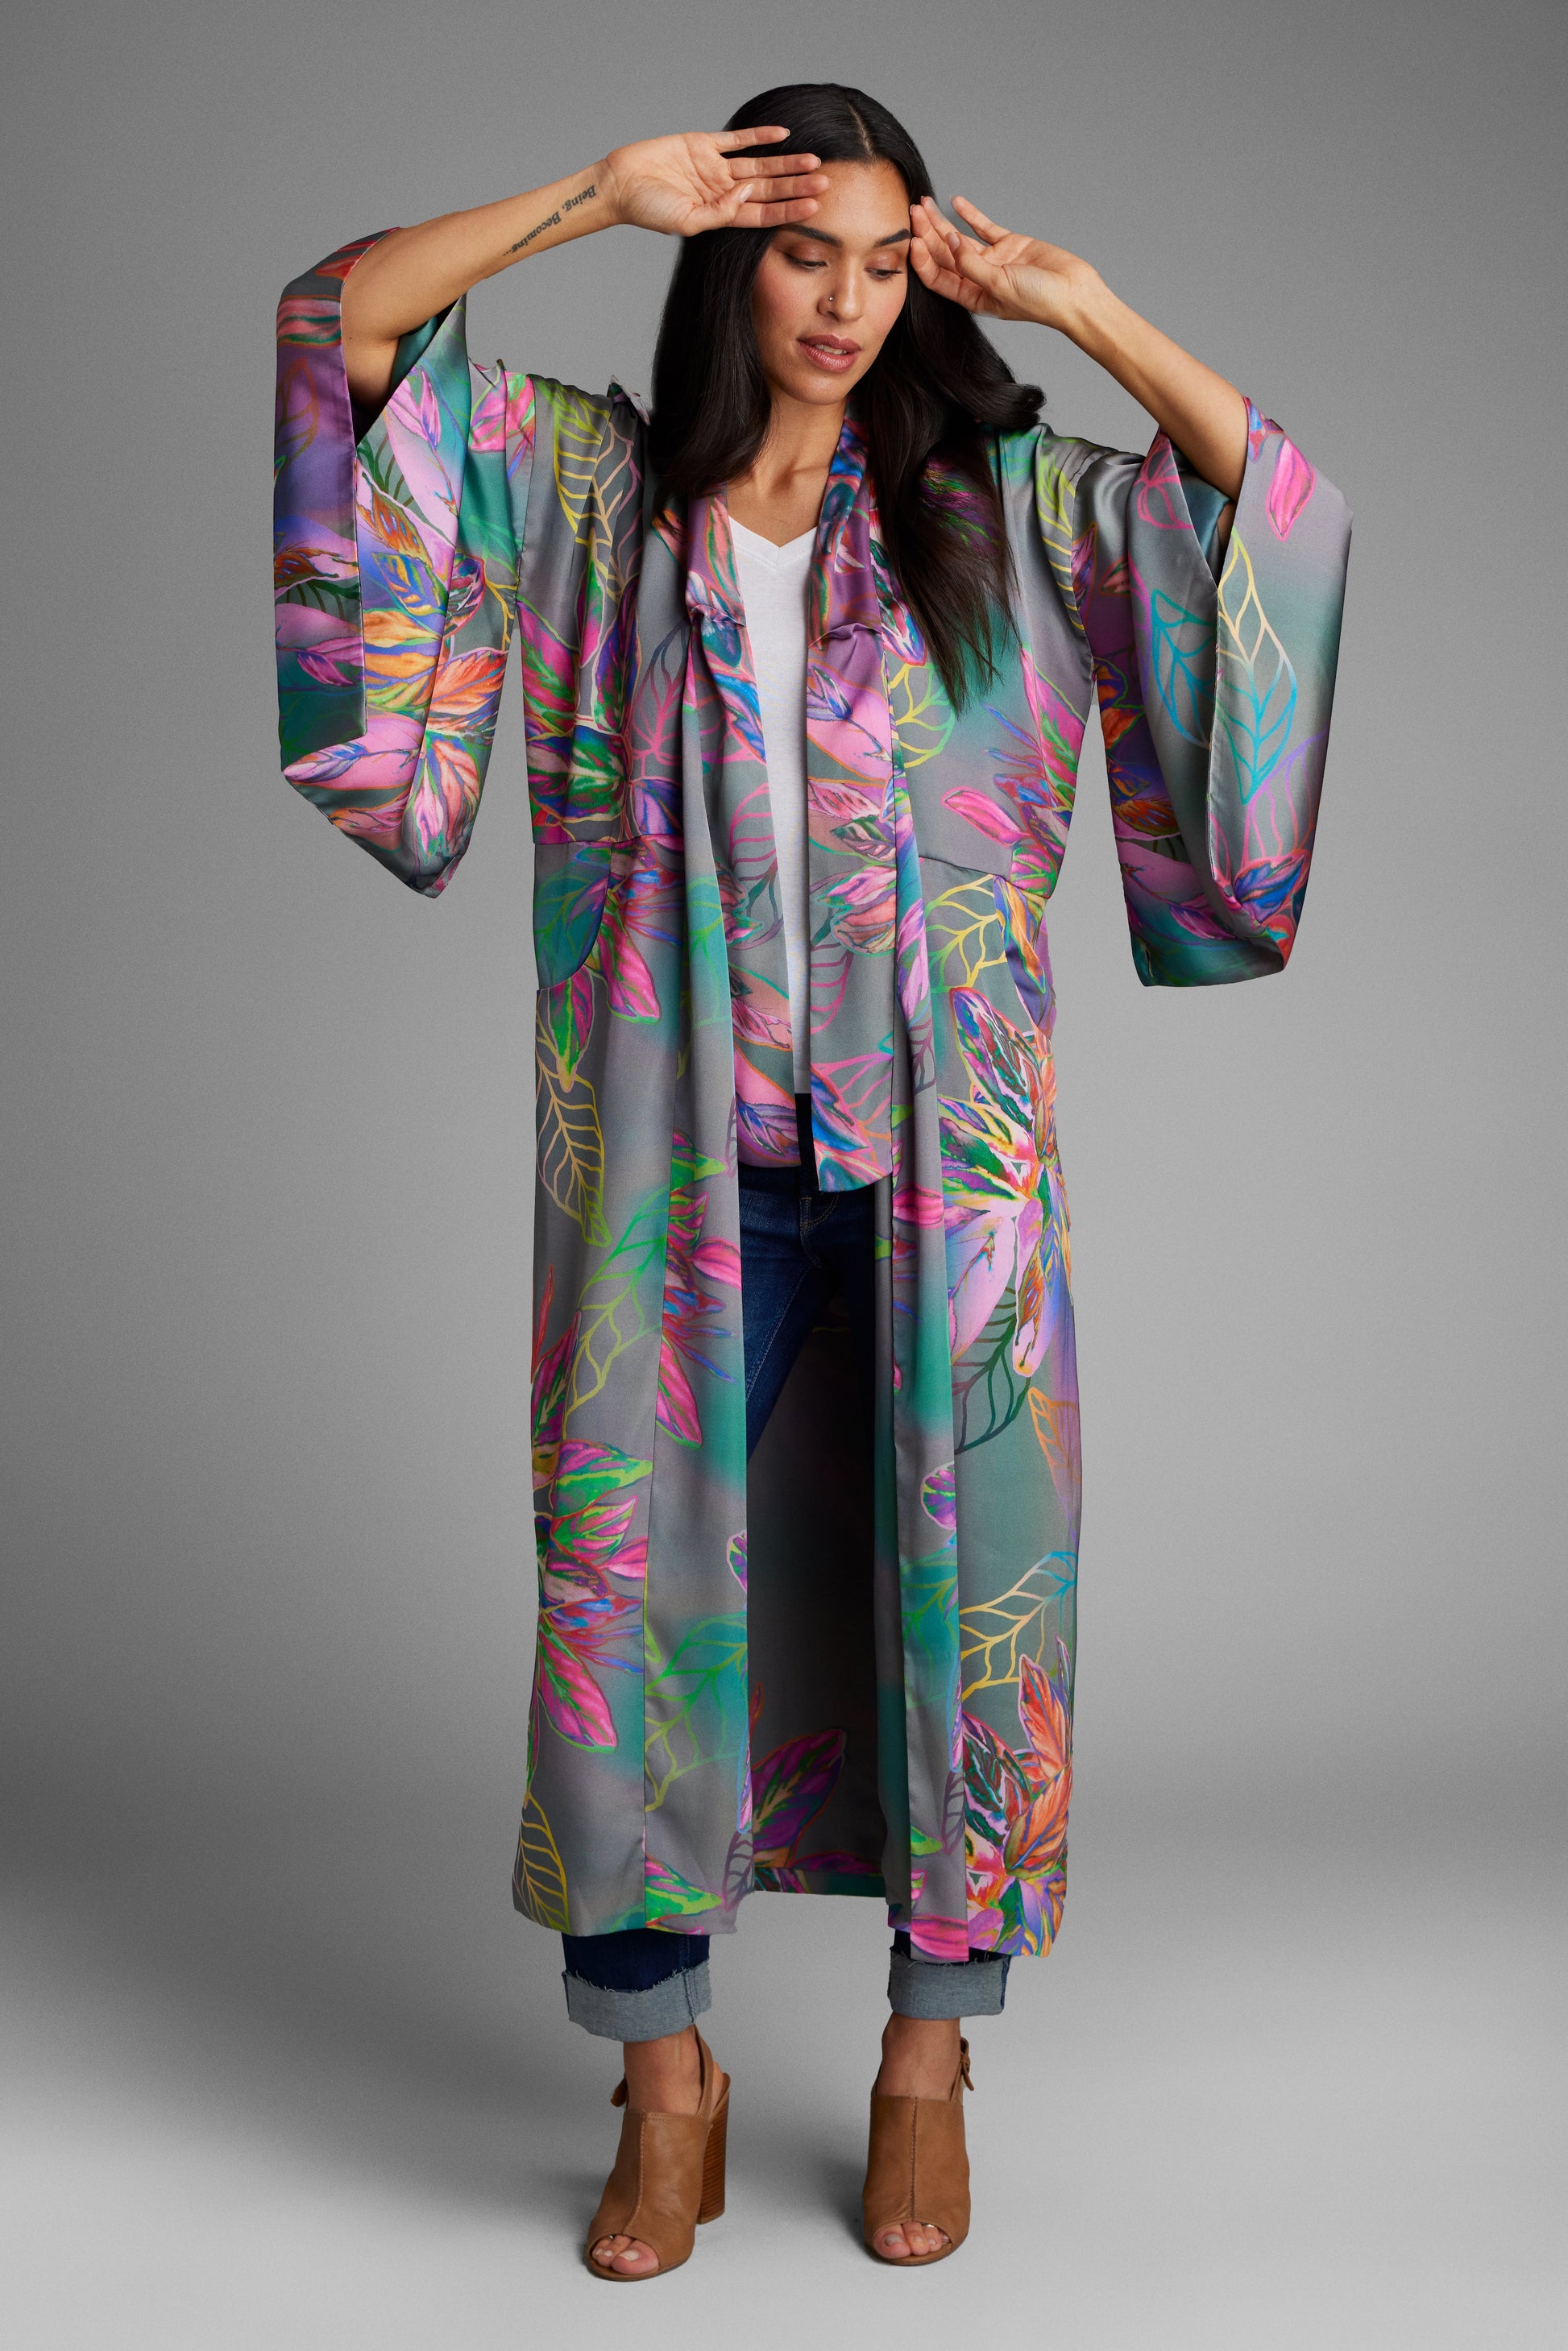 Woman standing with hands on her face wearing an all over tropical printed kimono duster made from recycled materials